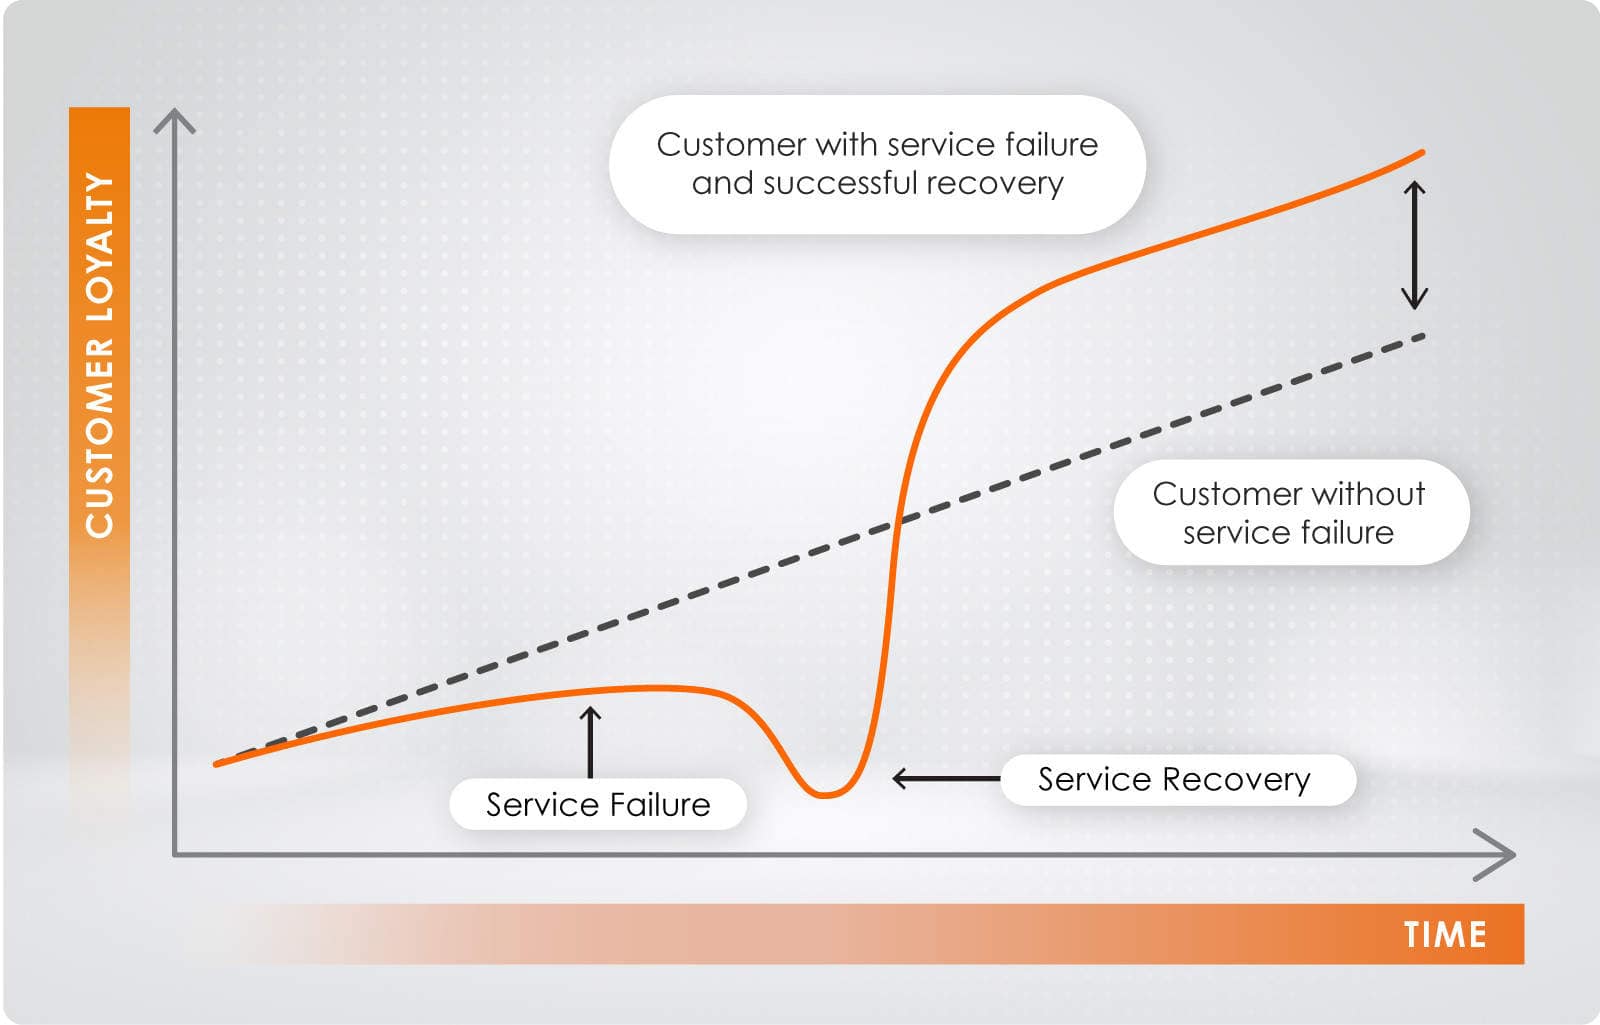 Graph illustrating customer loyalty over time for a retail bank, comparing scenarios with and without service failure.